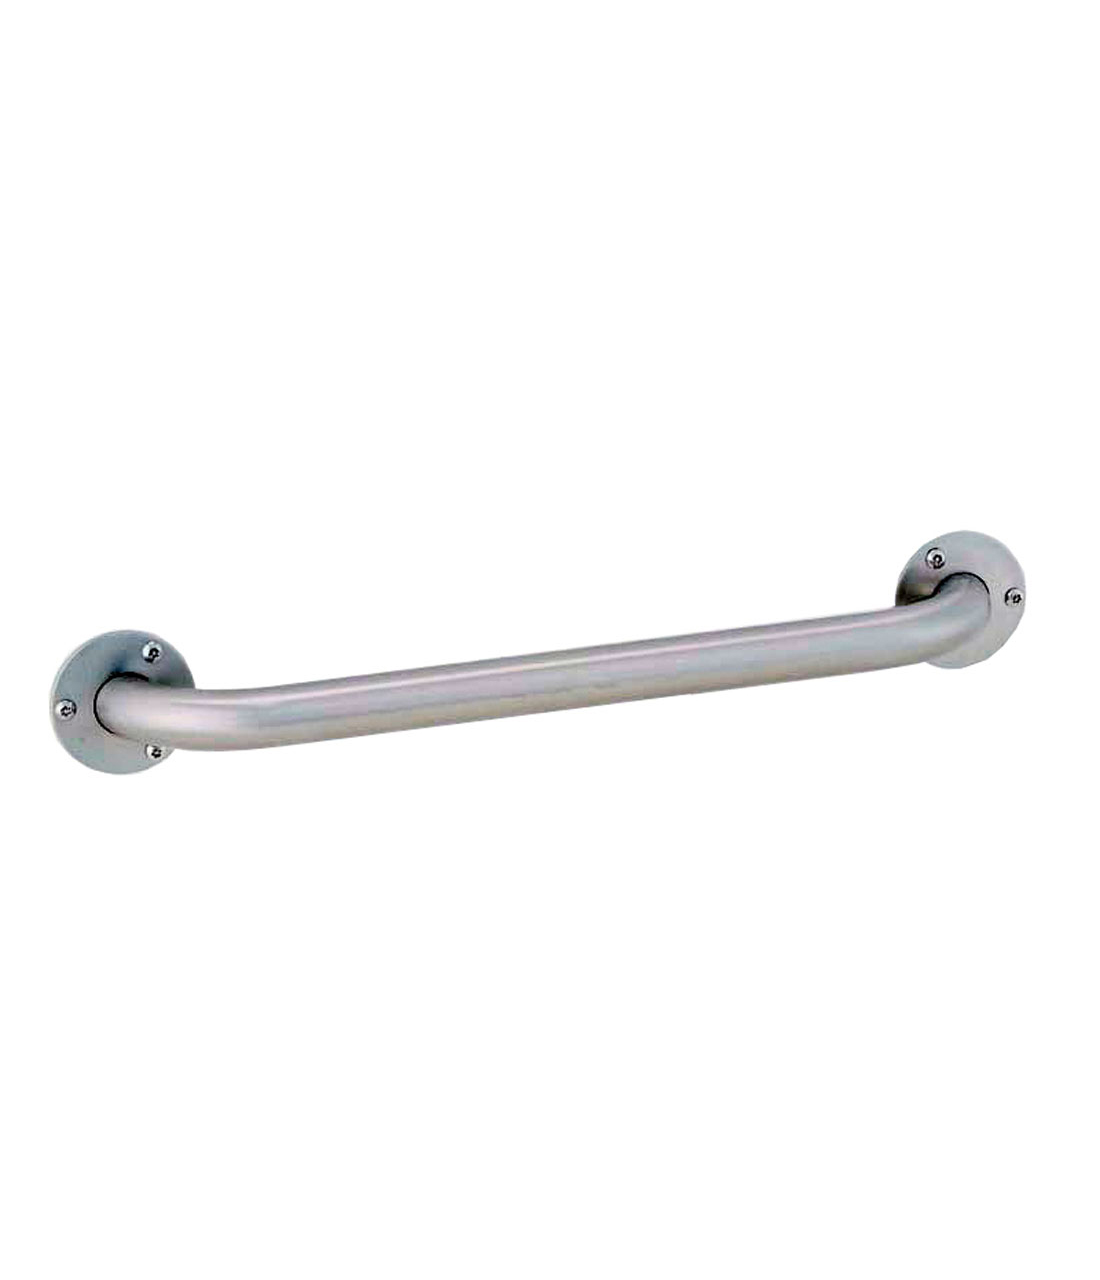 1.25 Inch Diameter Straight Grab Bar with Exposed Flange - (Model #: 125e-series-exposed) main image